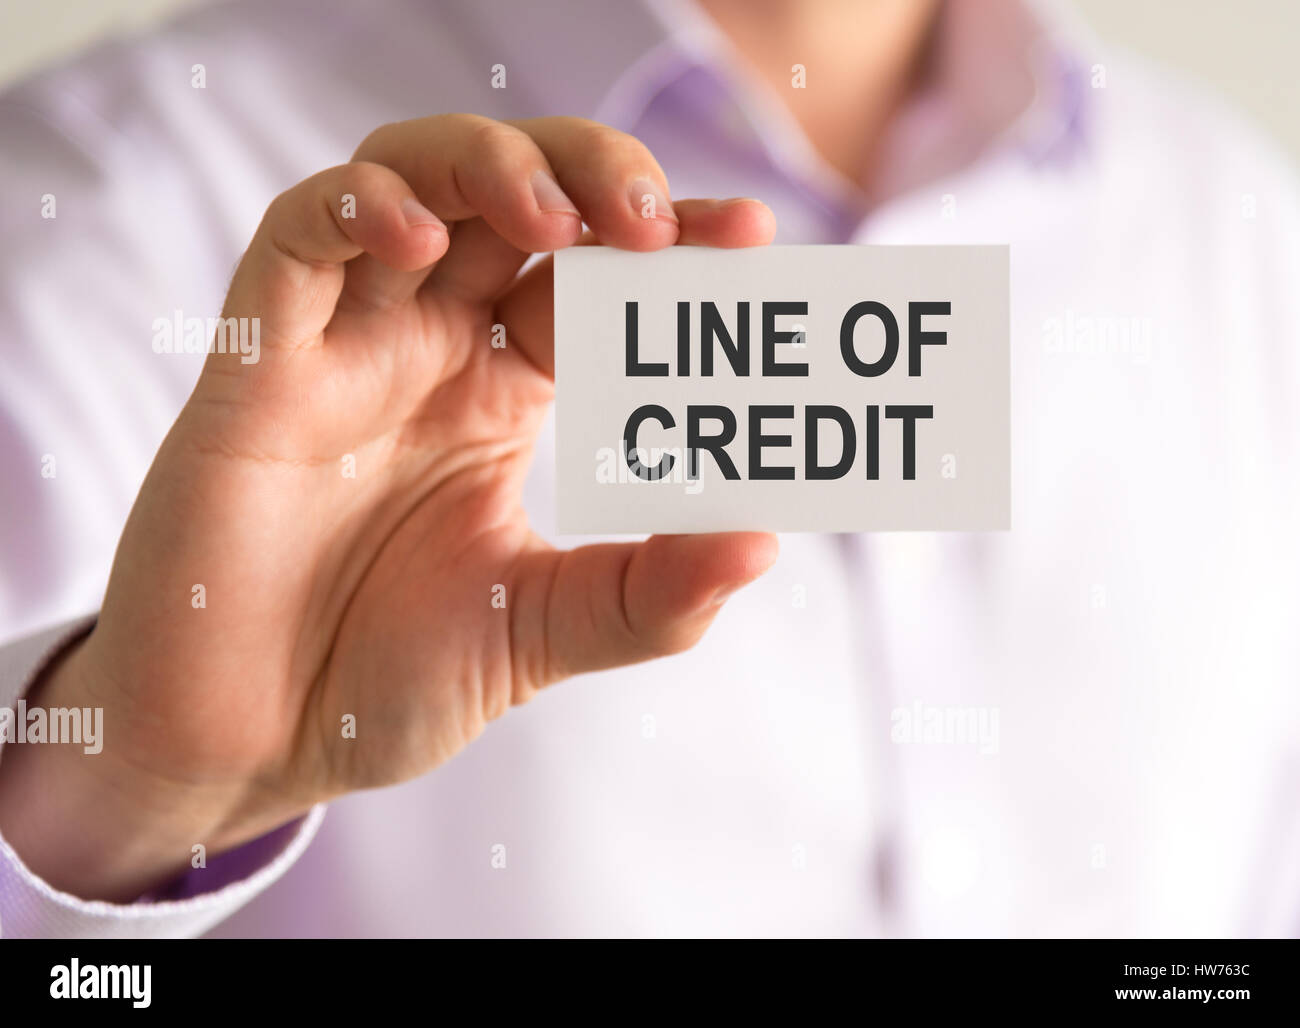 Closeup on businessman holding a card with LINE OF CREDIT message, business concept image with soft focus background Stock Photo